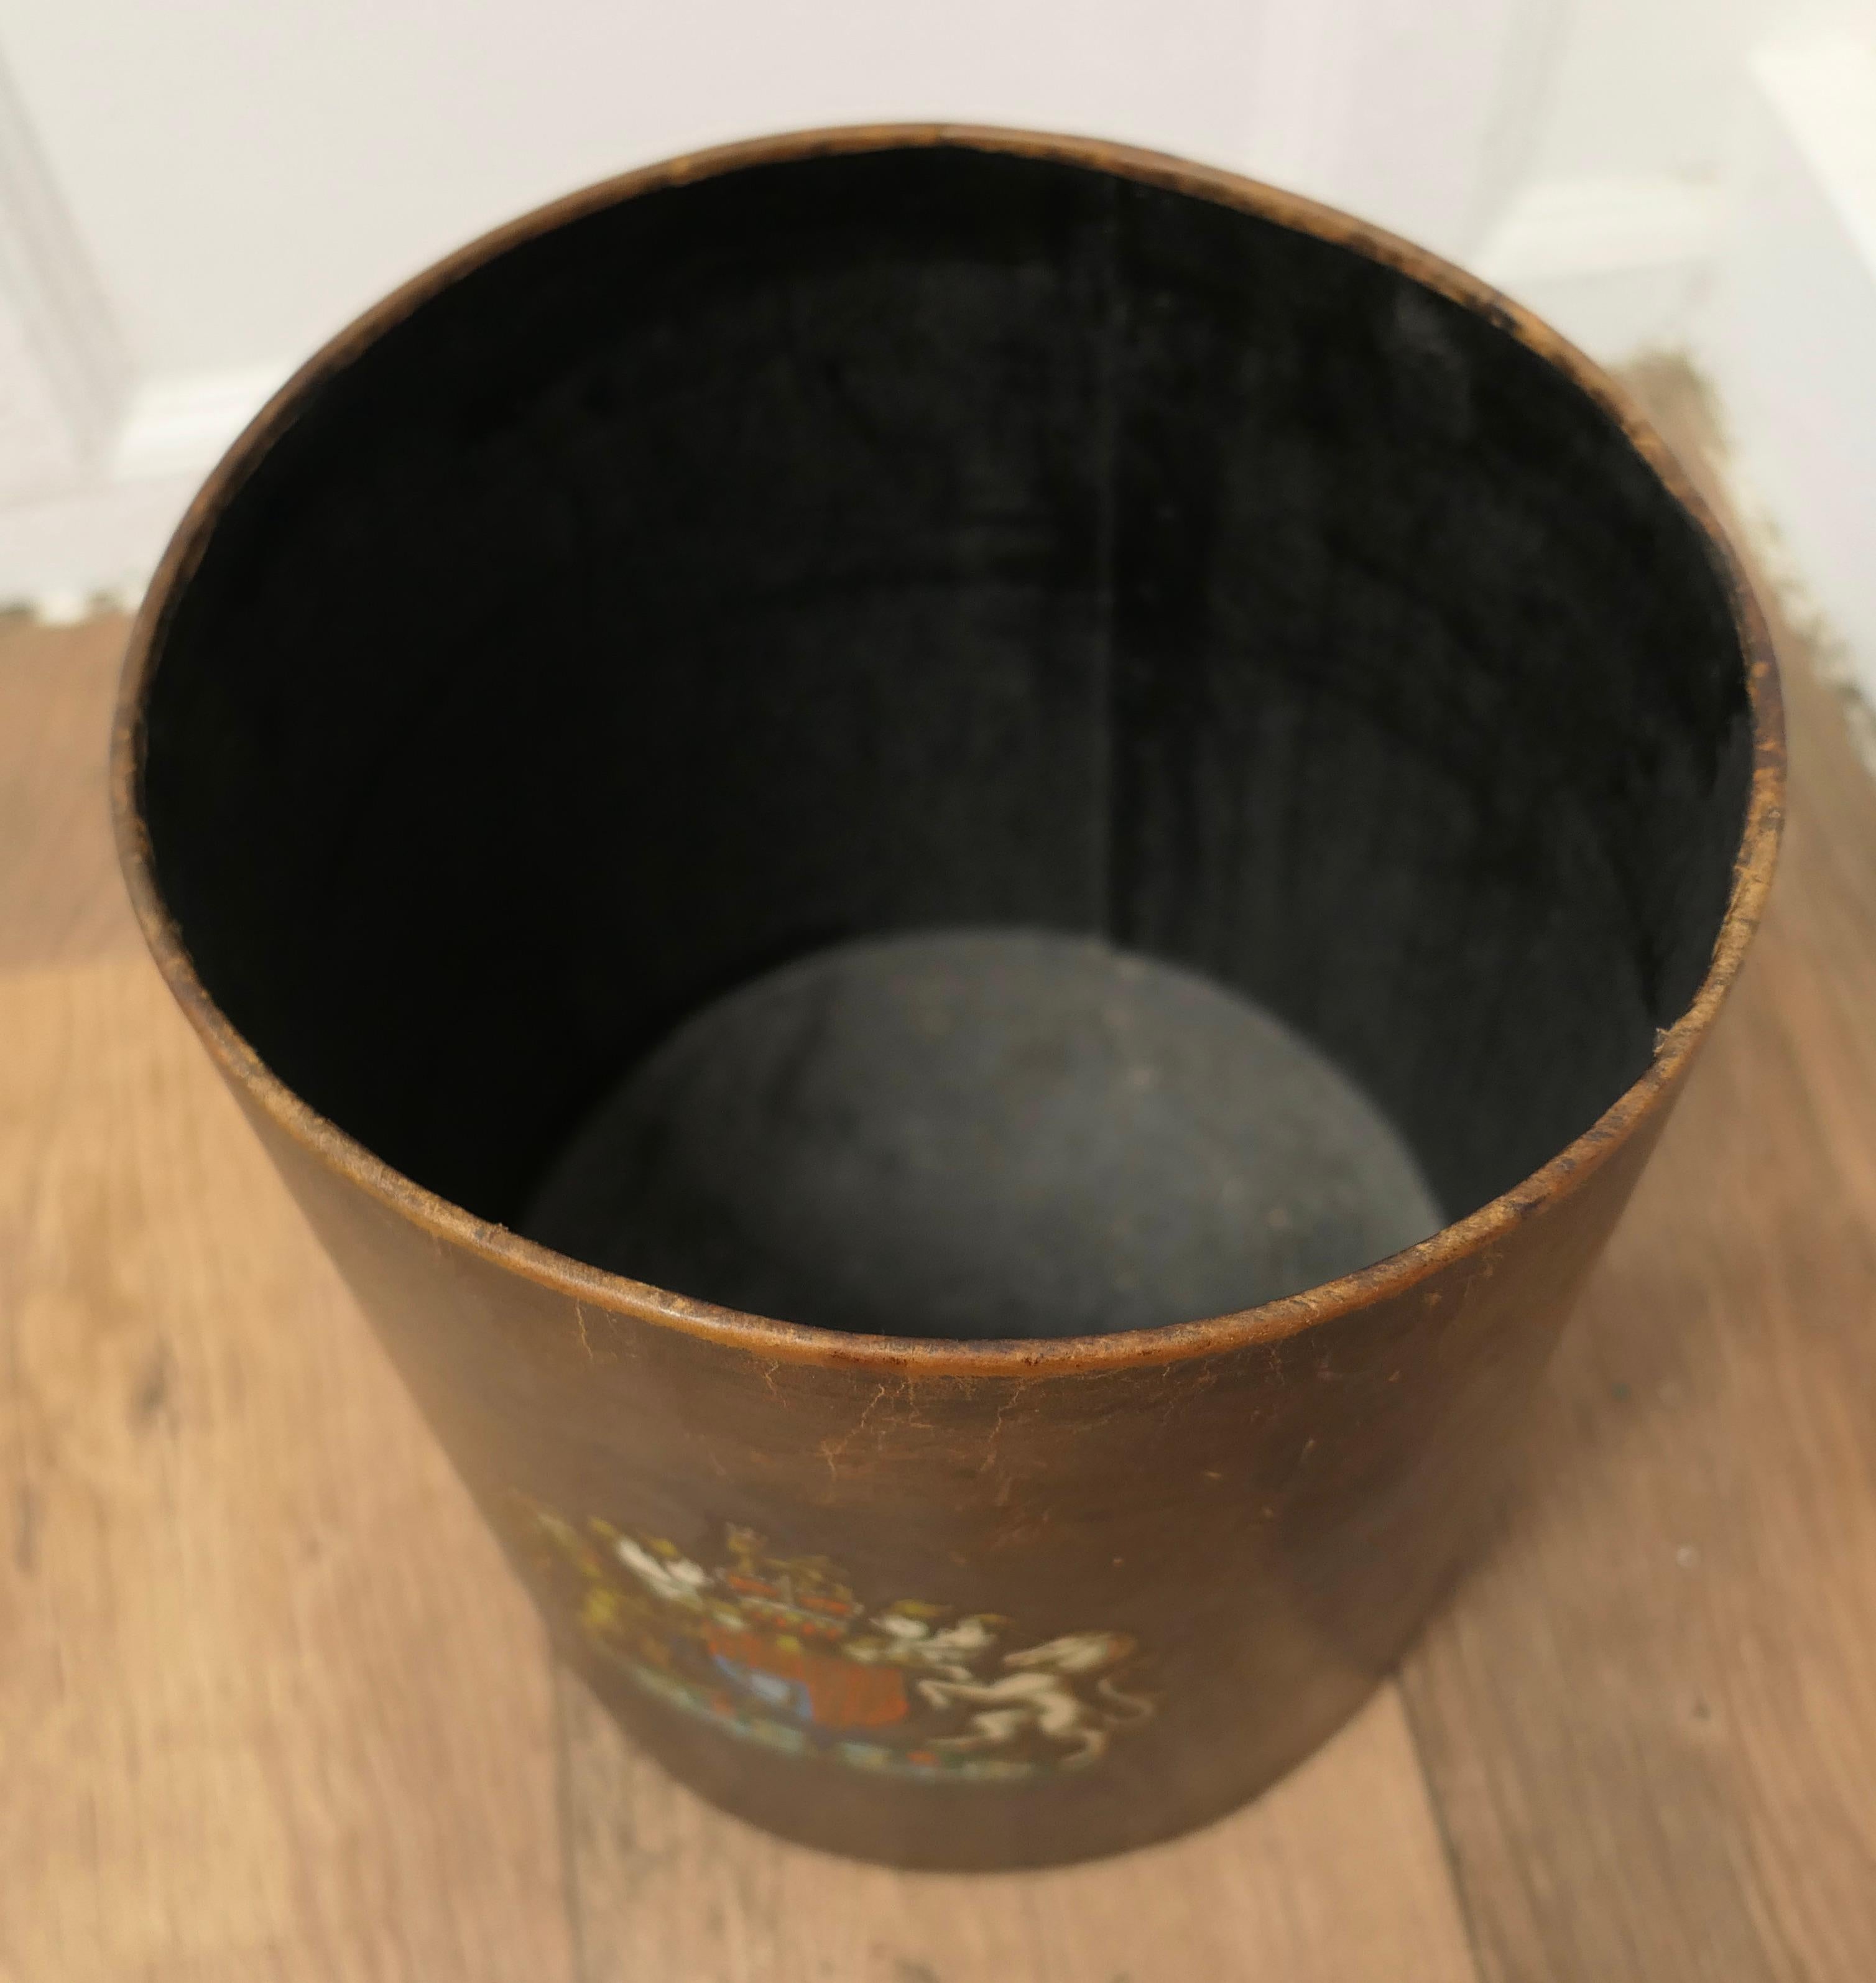 Early 20th Century Leather Coat of Arms Waste Paper Basket  The basket is made in leather   